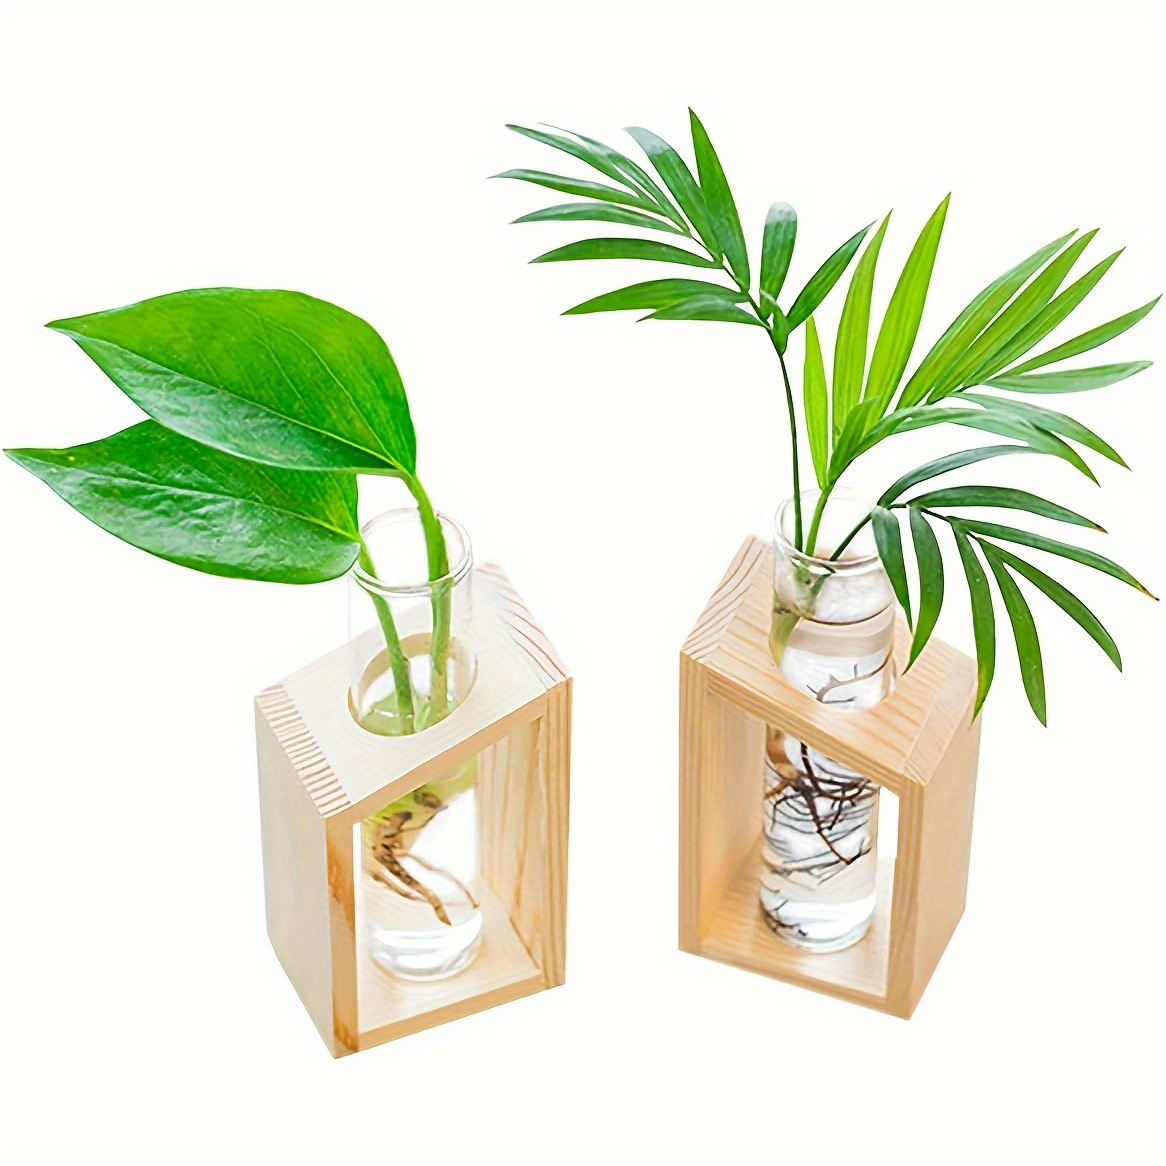 

2-piece Mini Glass Propagation Station - Elegant Hydroponic Plant Terrarium With Wooden Stand, Removable Test Tubes & Accessories For Home Garden Decor